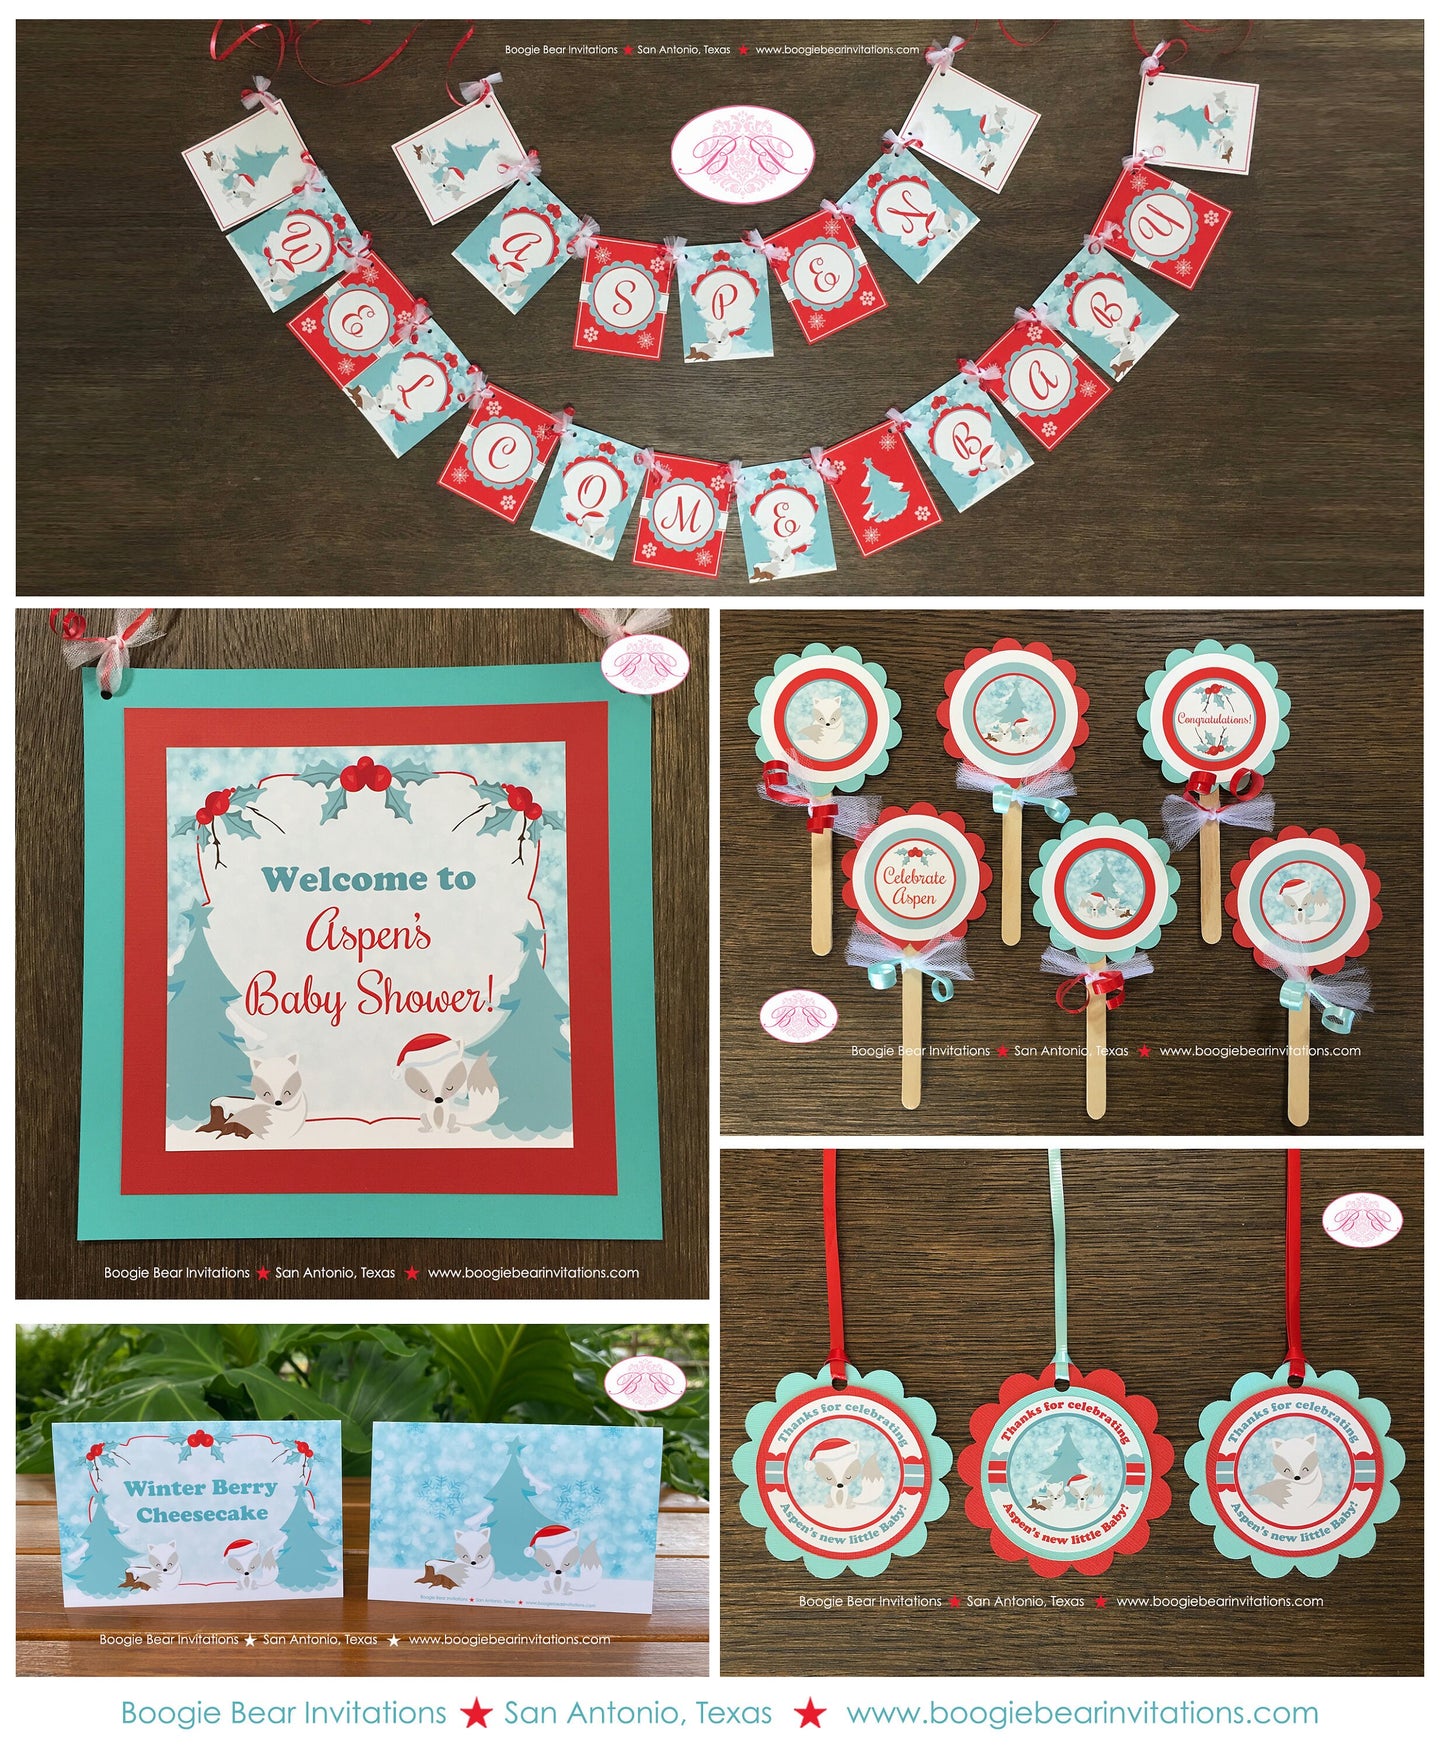 Woodland Winter Fox Baby Shower Package Christmas Holiday Snow Arctic White Red Santa Hat Birthday Party Boogie Bear Invitations Aspen Theme